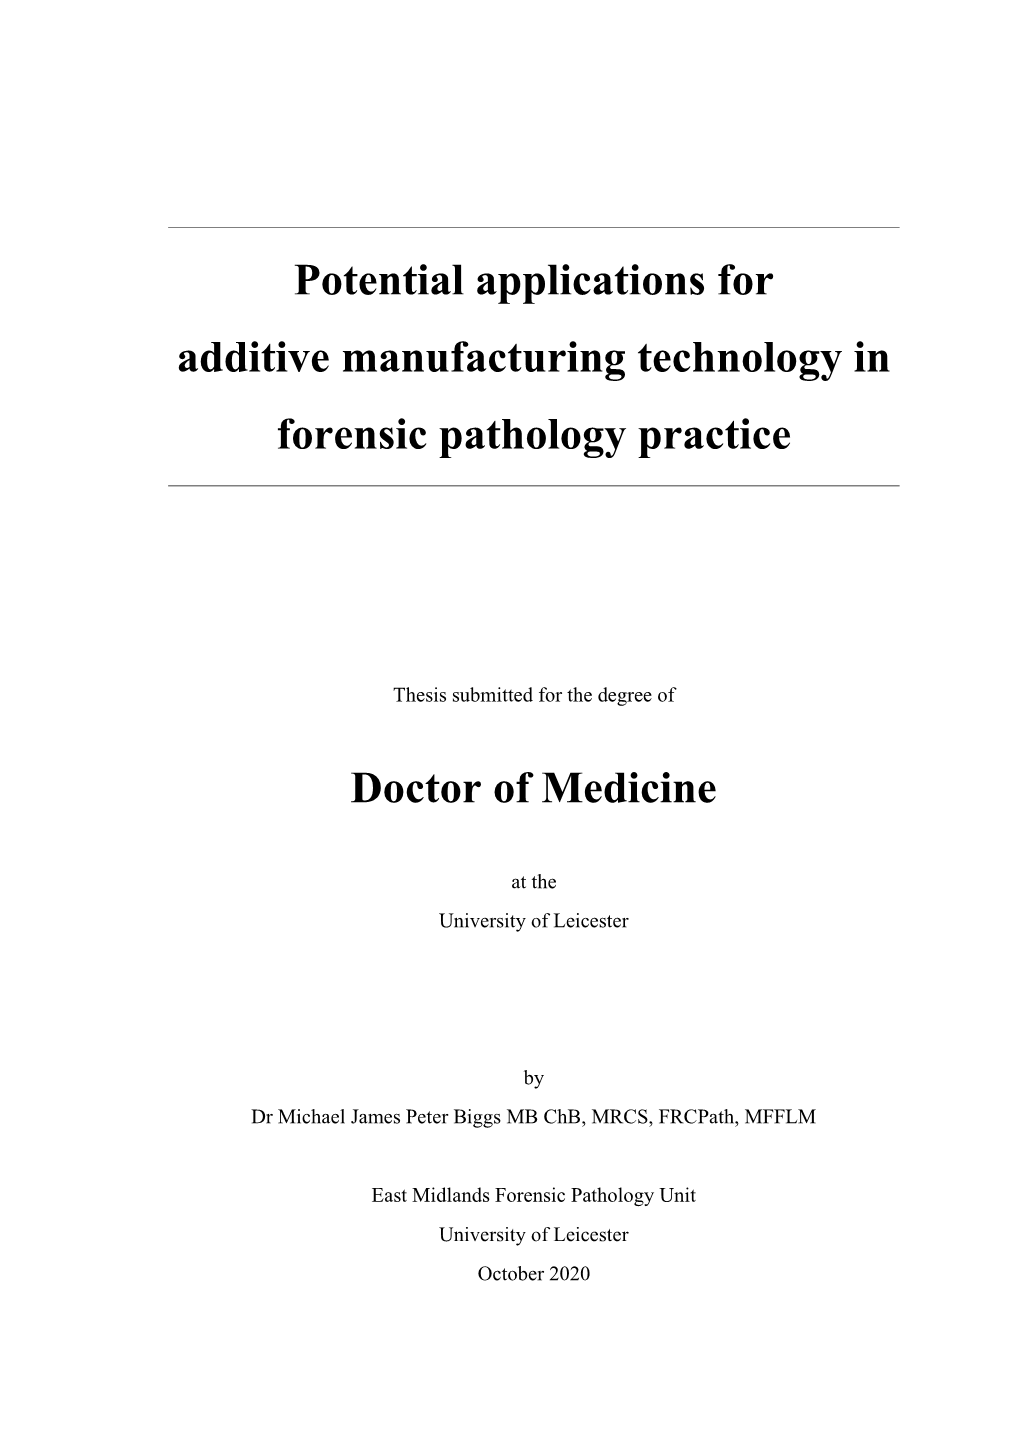 Potential Applications for Additive Manufacturing Technology in Forensic Pathology Practice